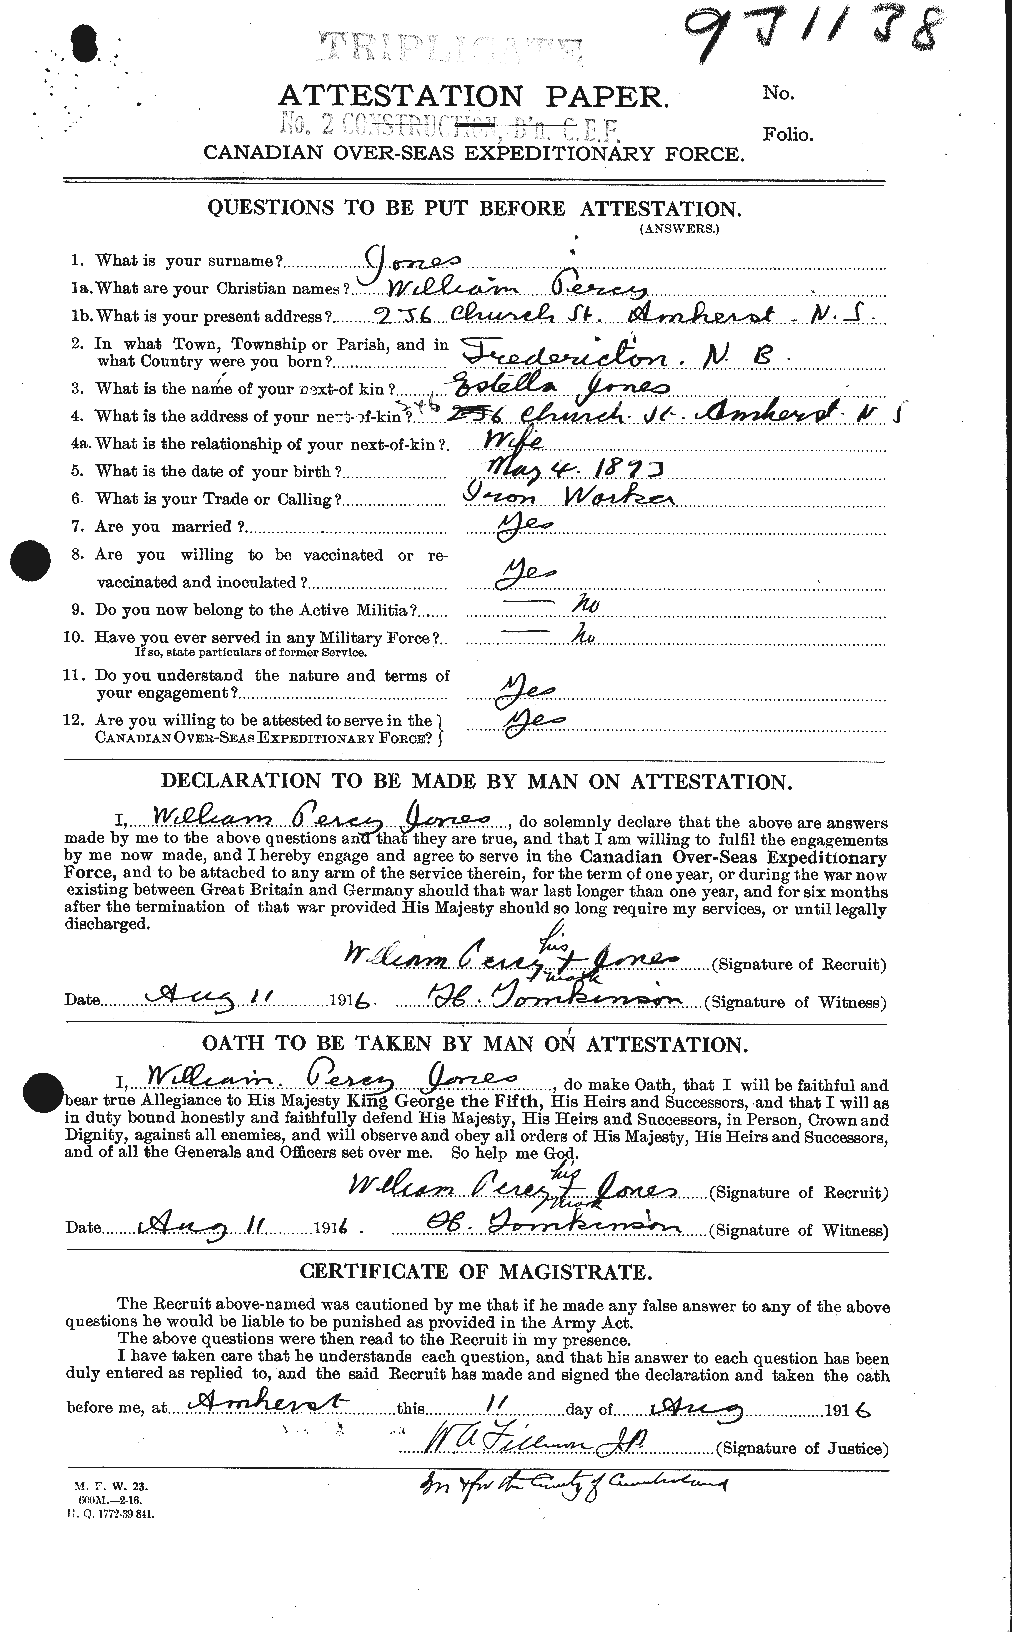 Personnel Records of the First World War - CEF 428606a